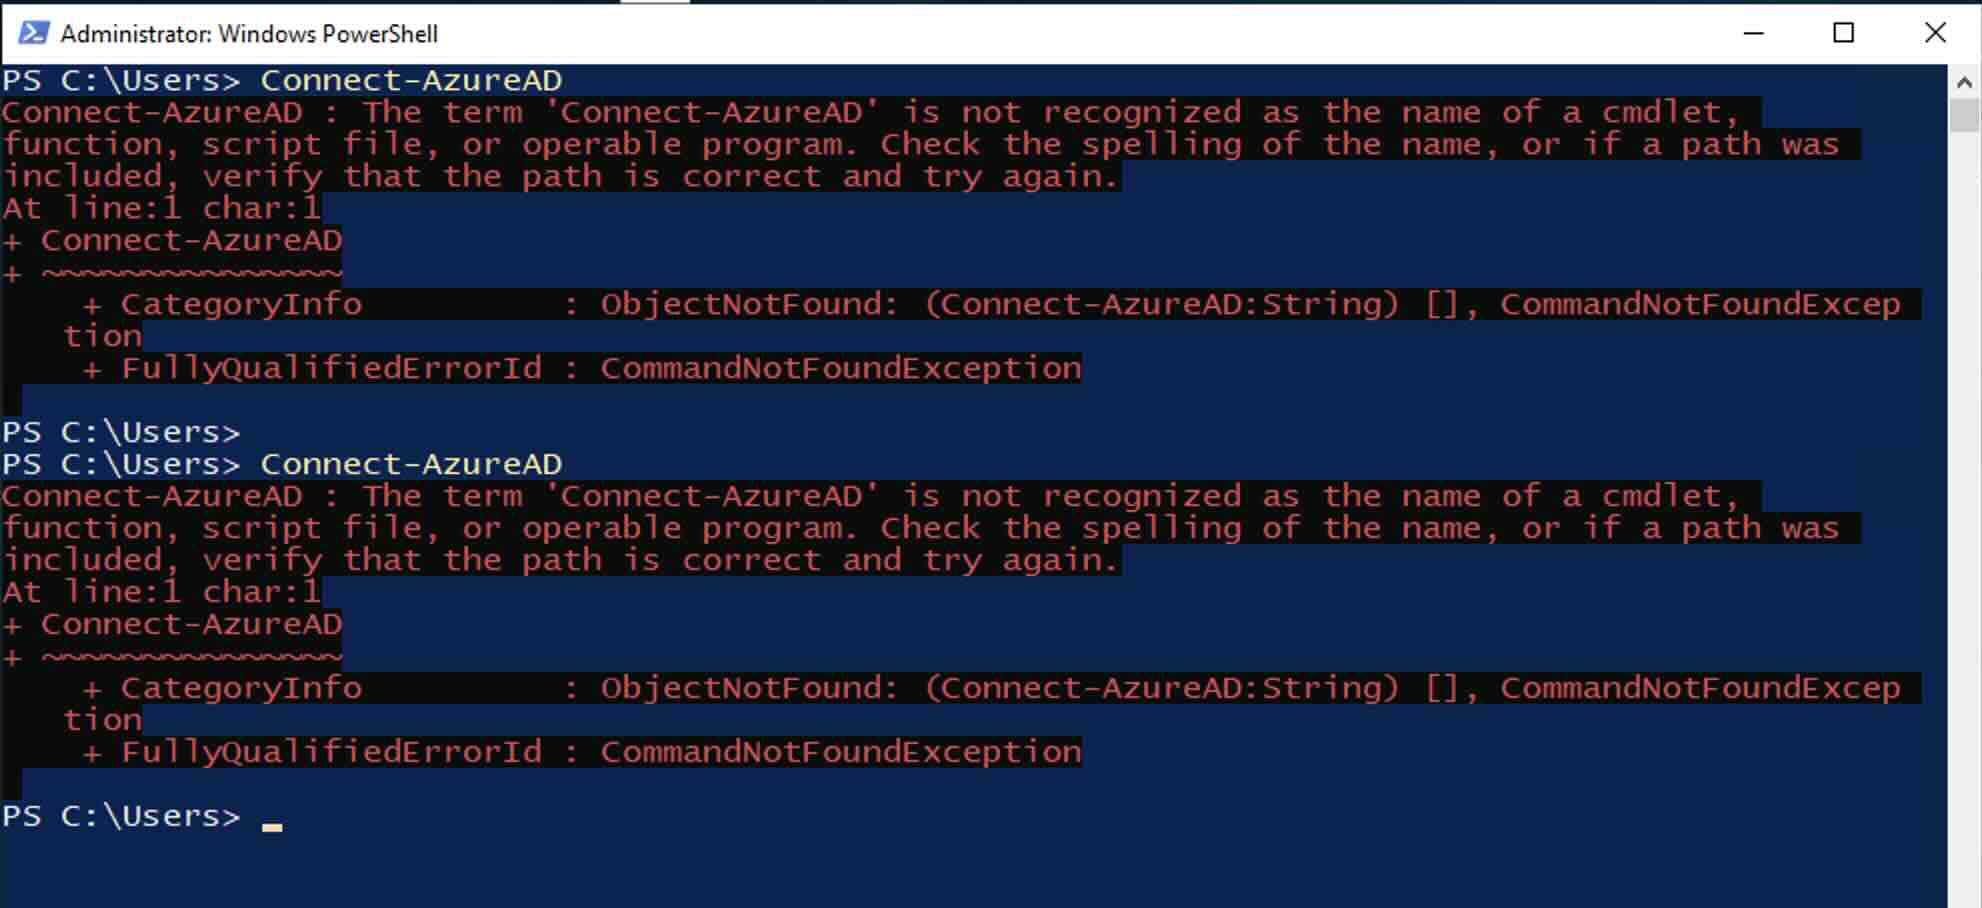 The term Connect-AzureAD is not recognized as the name of a cmdlet